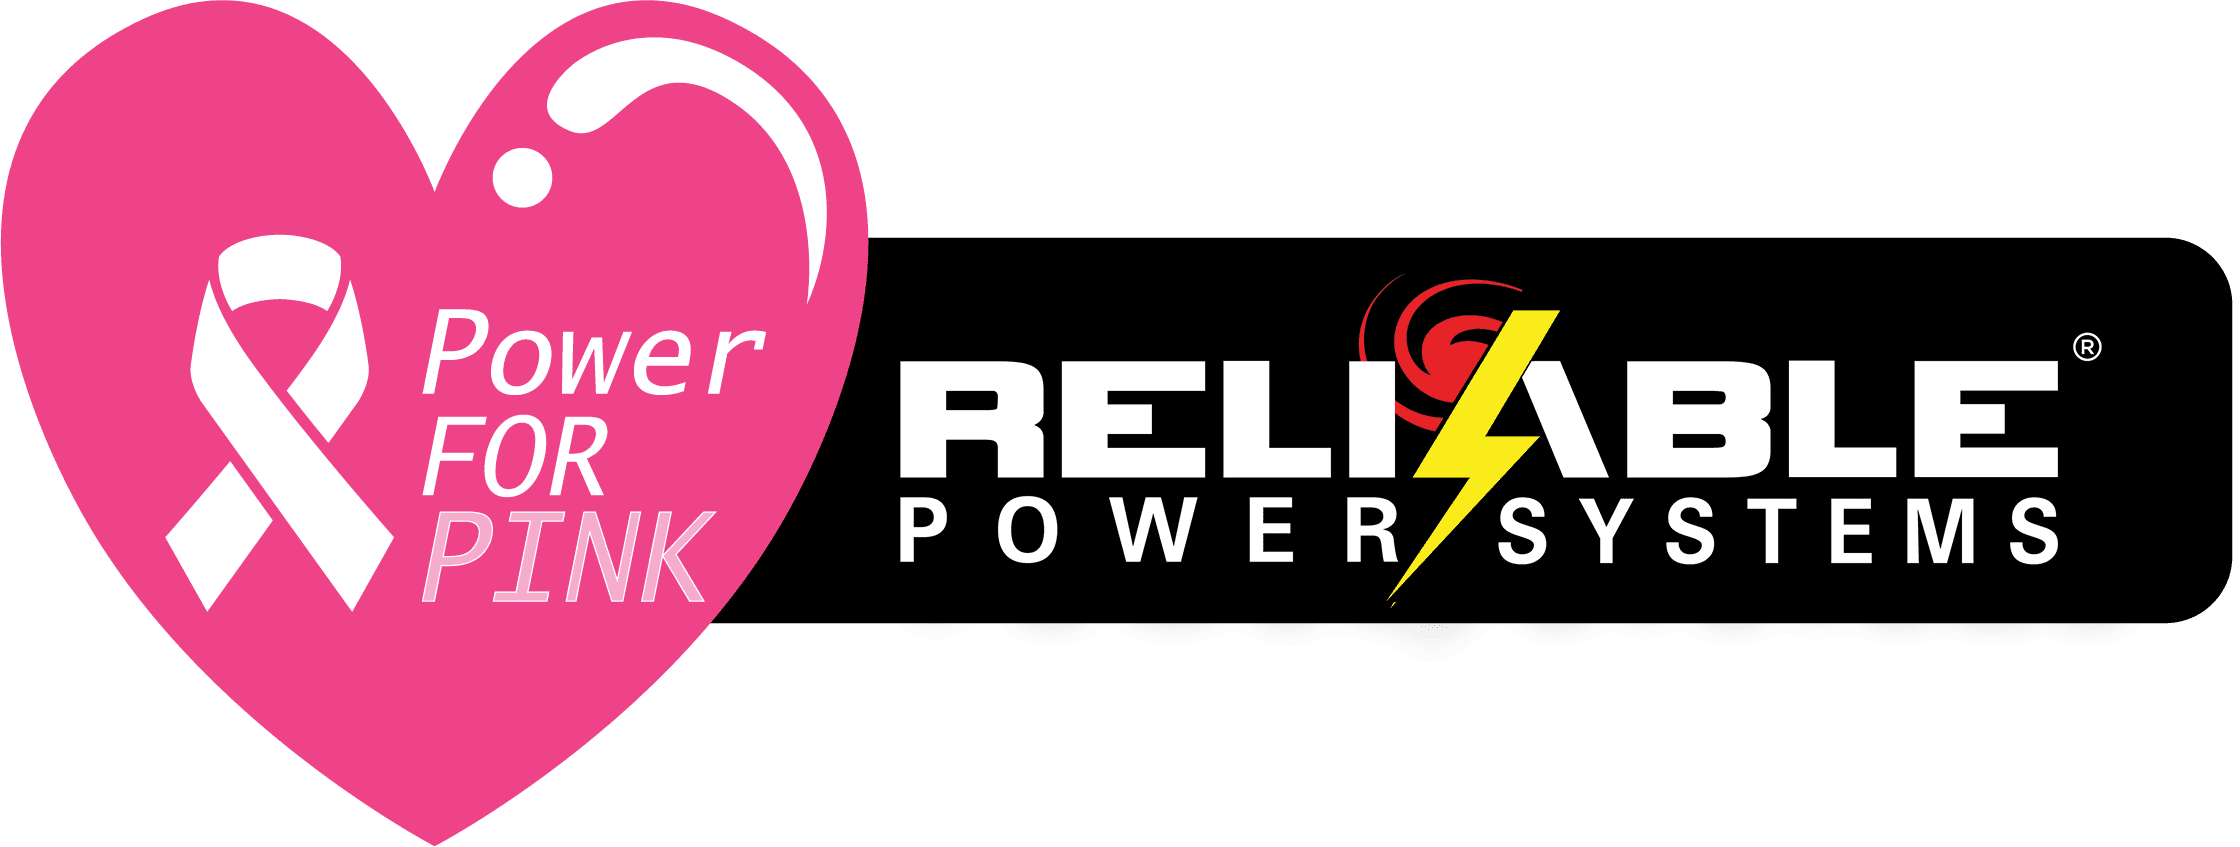 Power For Pink Logo shadow